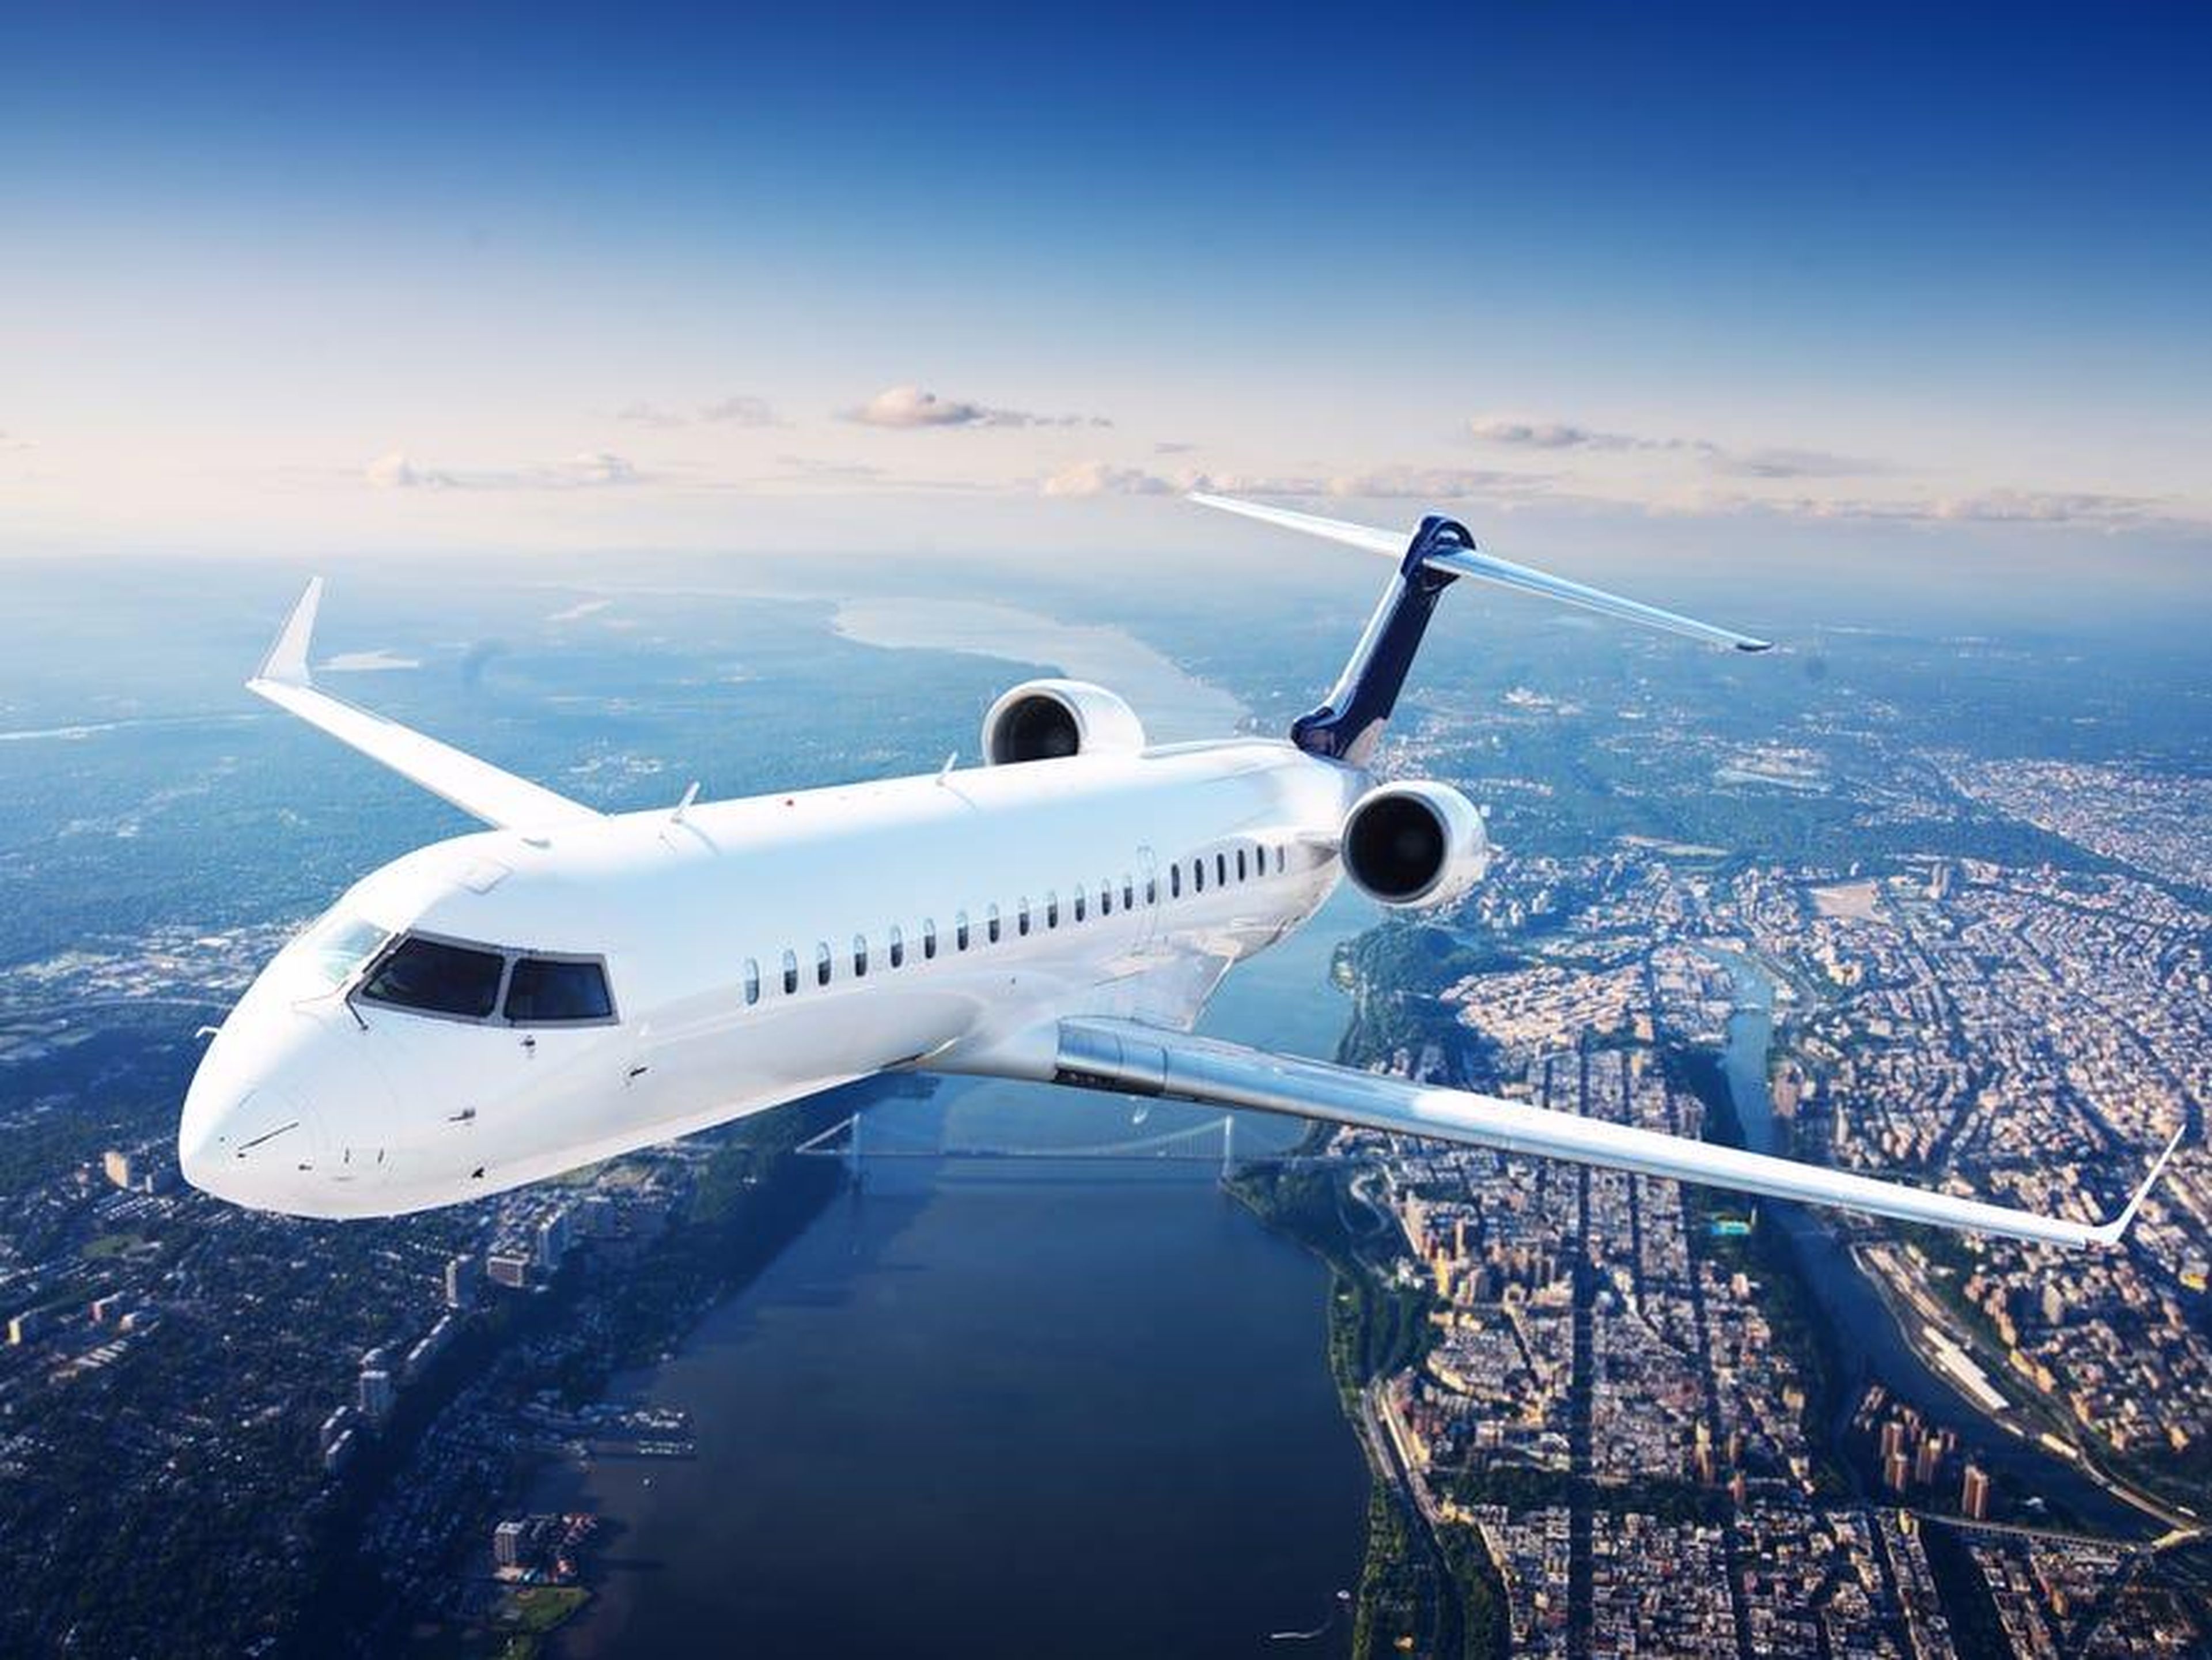 2. Private aviation companies are seeing a boom in demand.